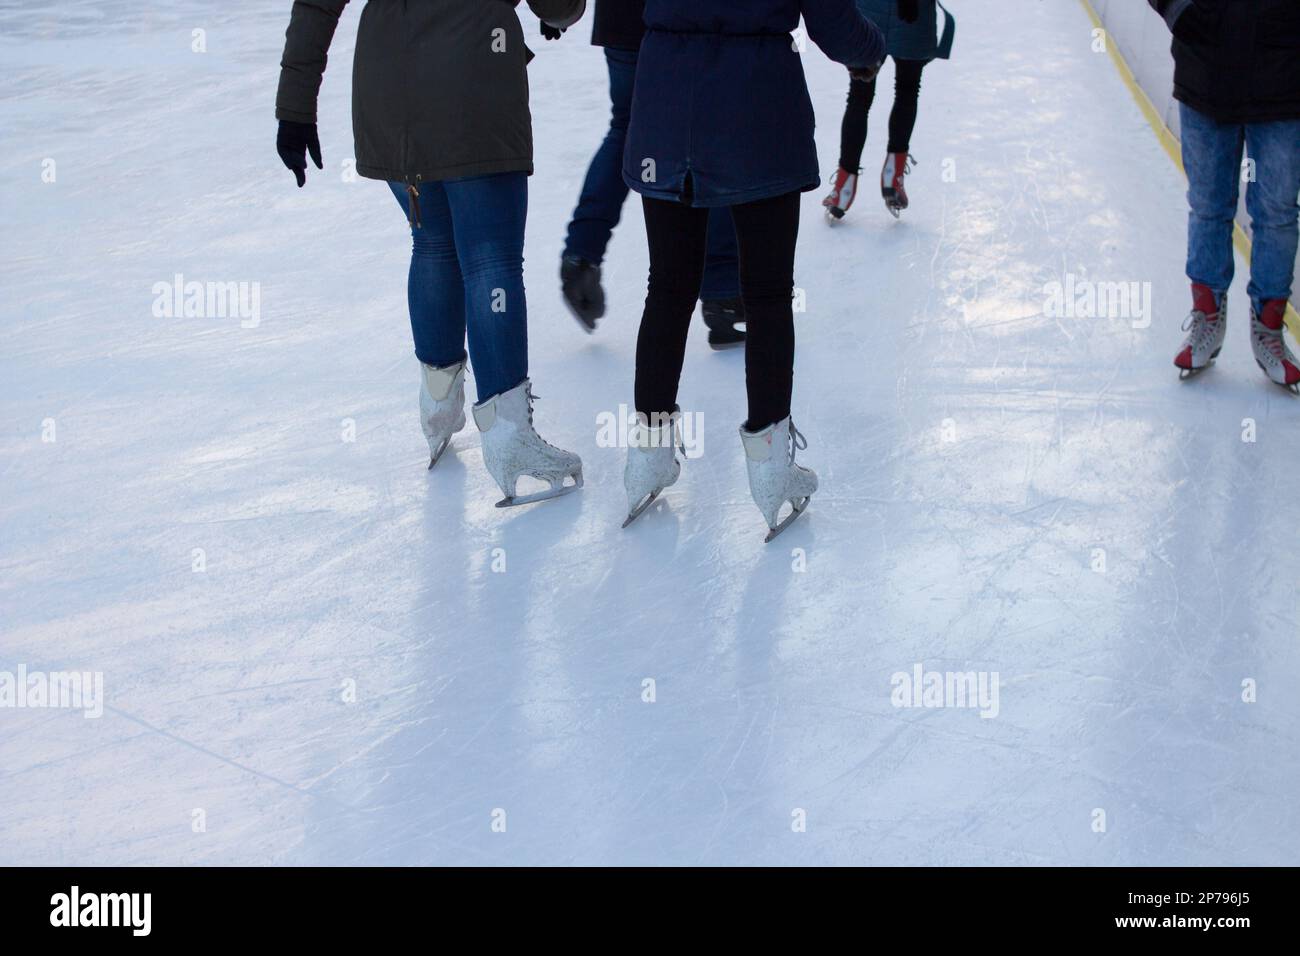 Woman ice skating. winter outdoors on ice rink. ice and legs Stock Photo